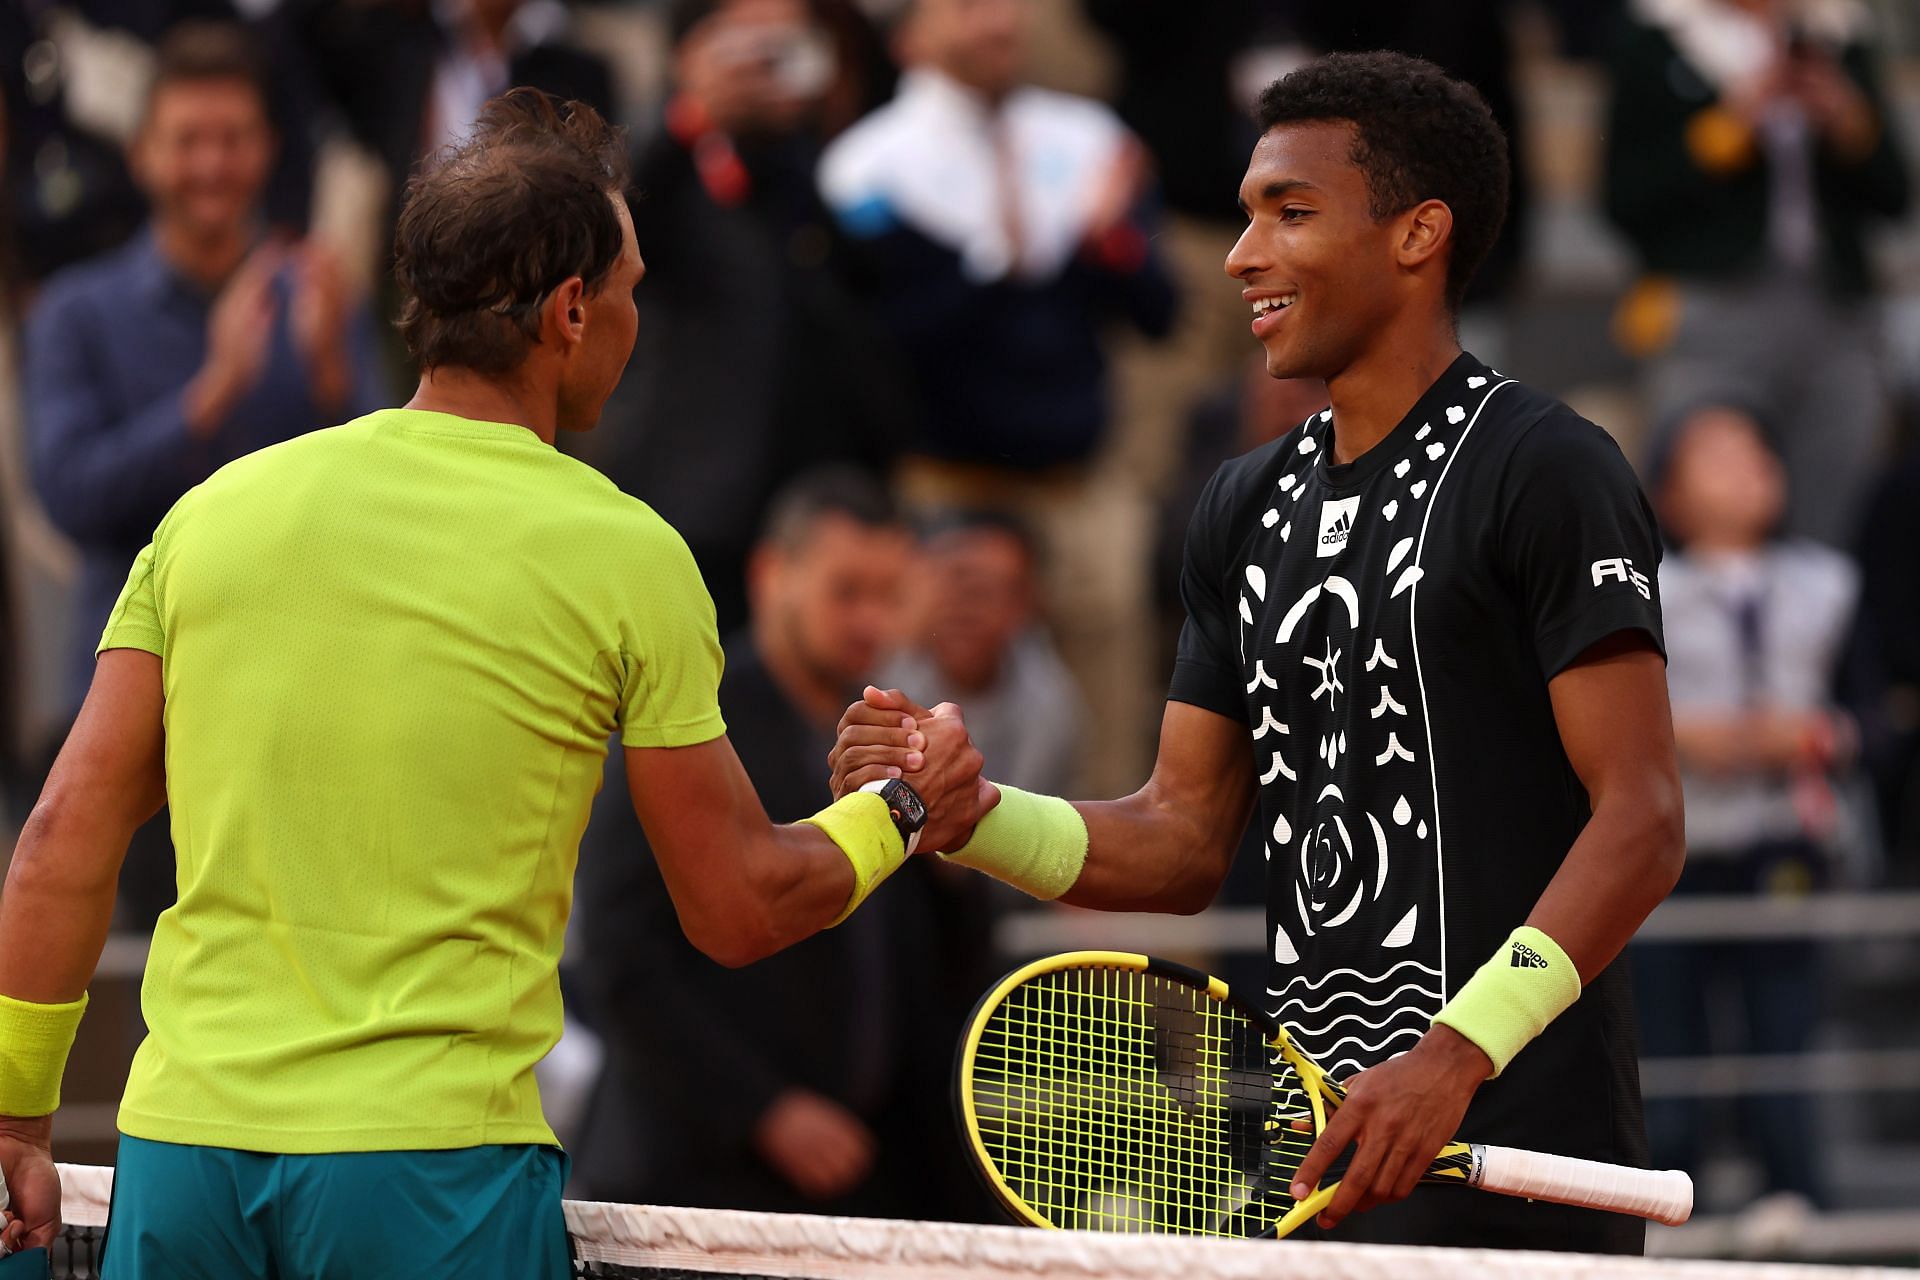 Rafael Nadal shakes hands with Felix Auger-Aliassime at the 2022 French Open